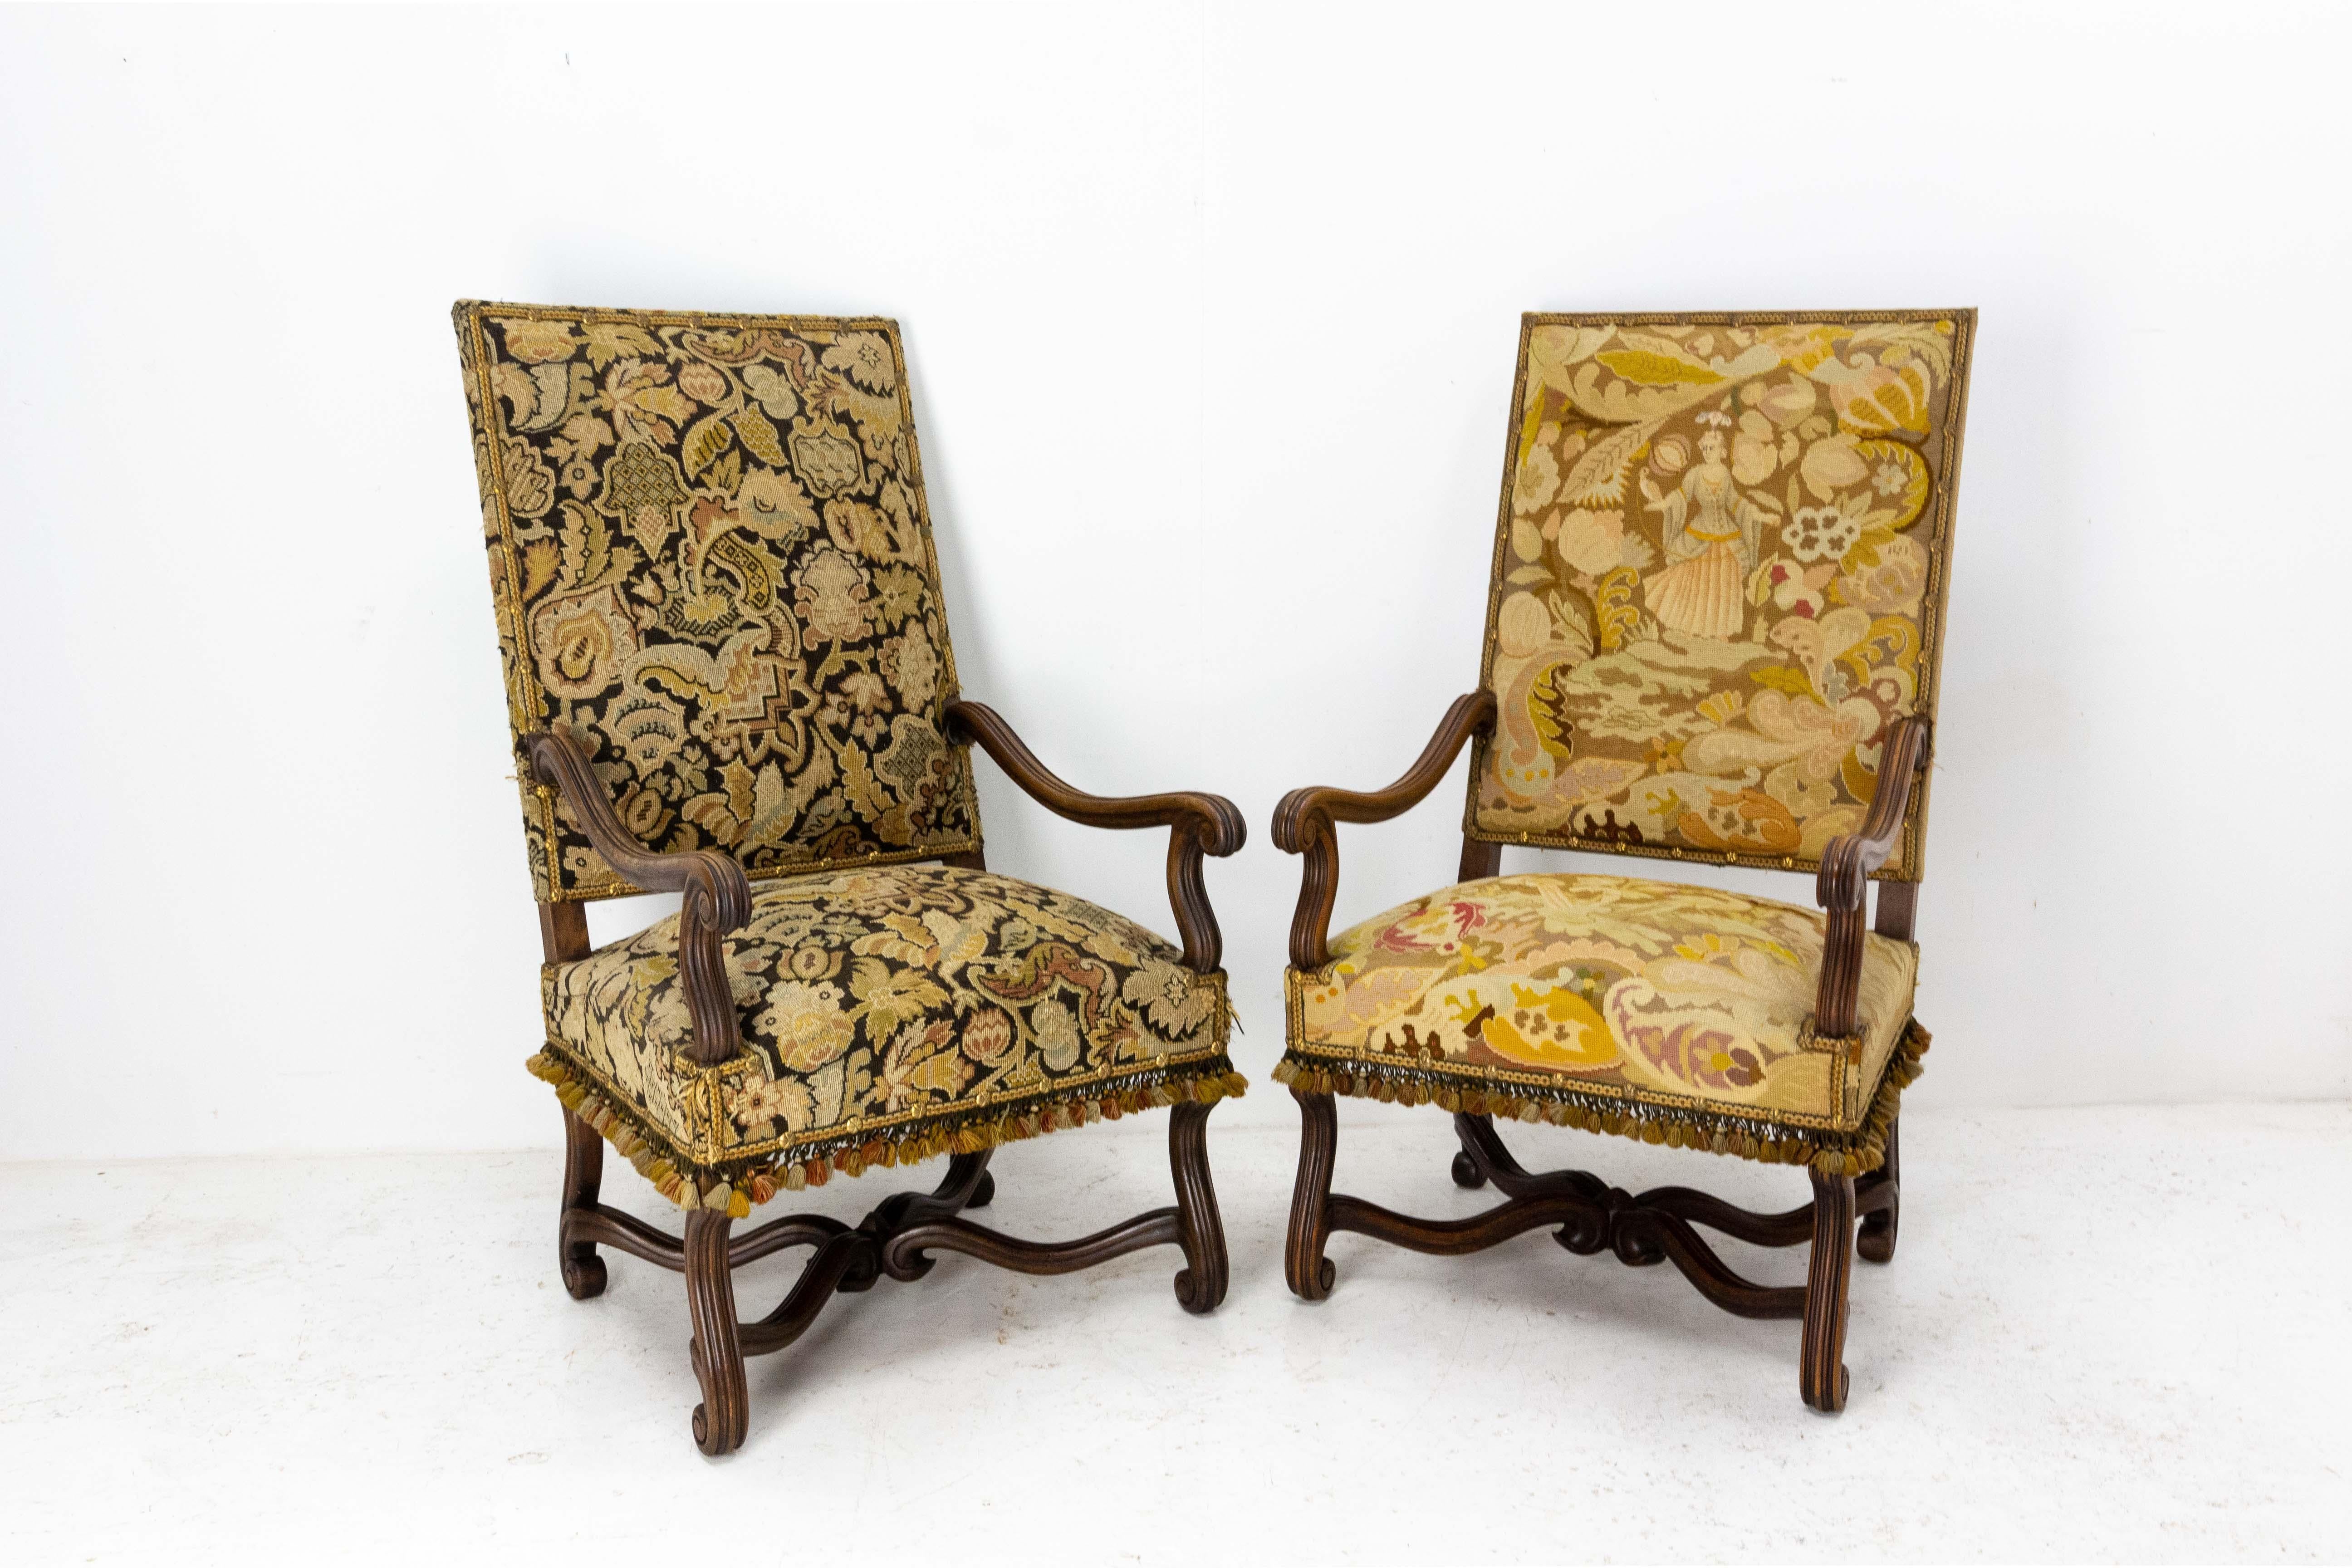 Fabric Pair of Louis XIII Revival Open Armchairs French, Late 19th Century to Recover For Sale